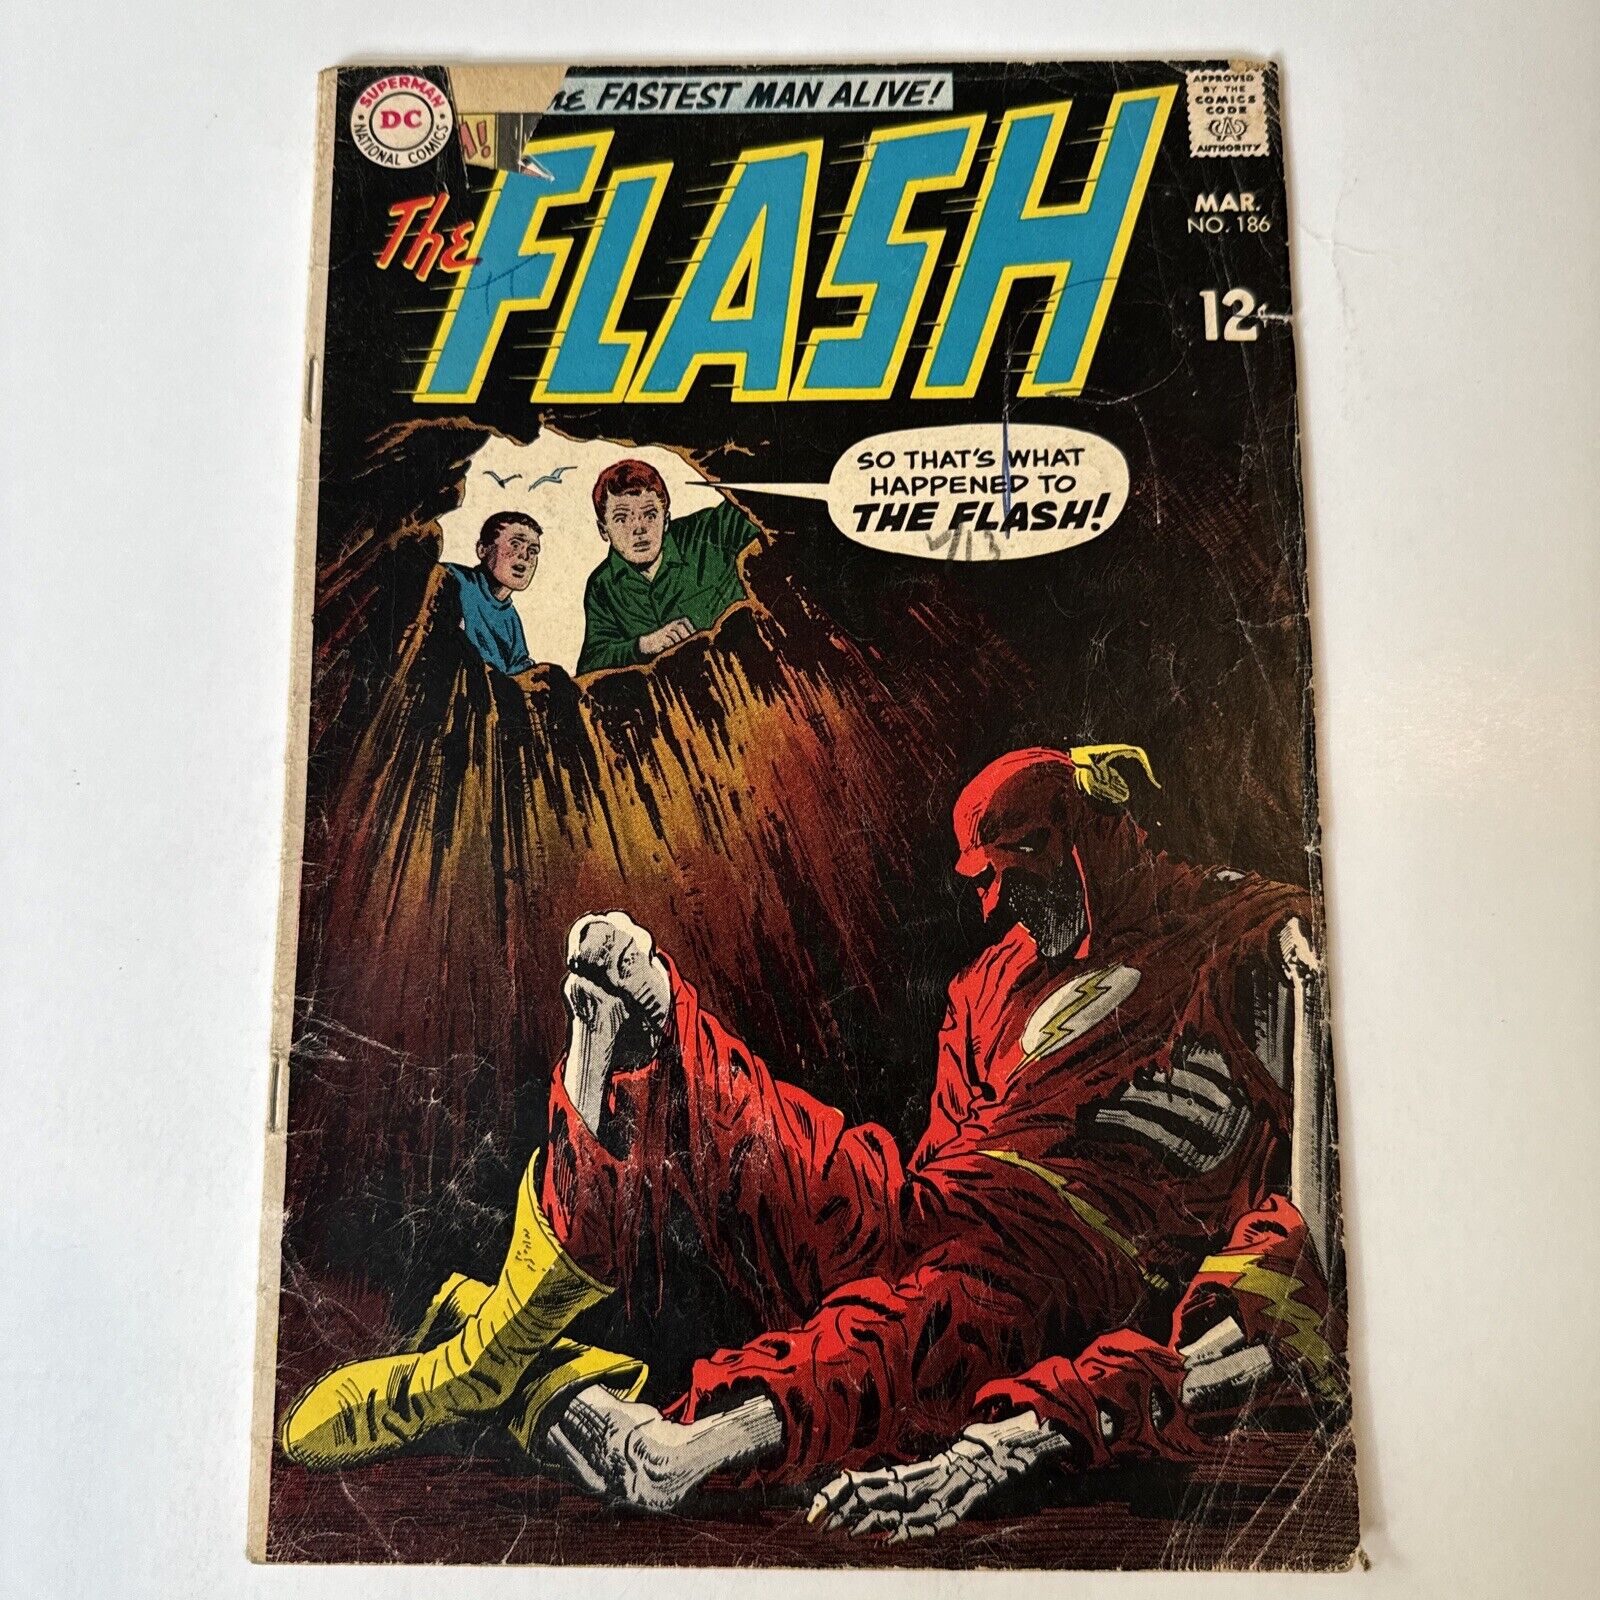 The Flash # 186 | SKELETON COVER  Ross Andru | Silver Age DC Comics 1969 | GD+